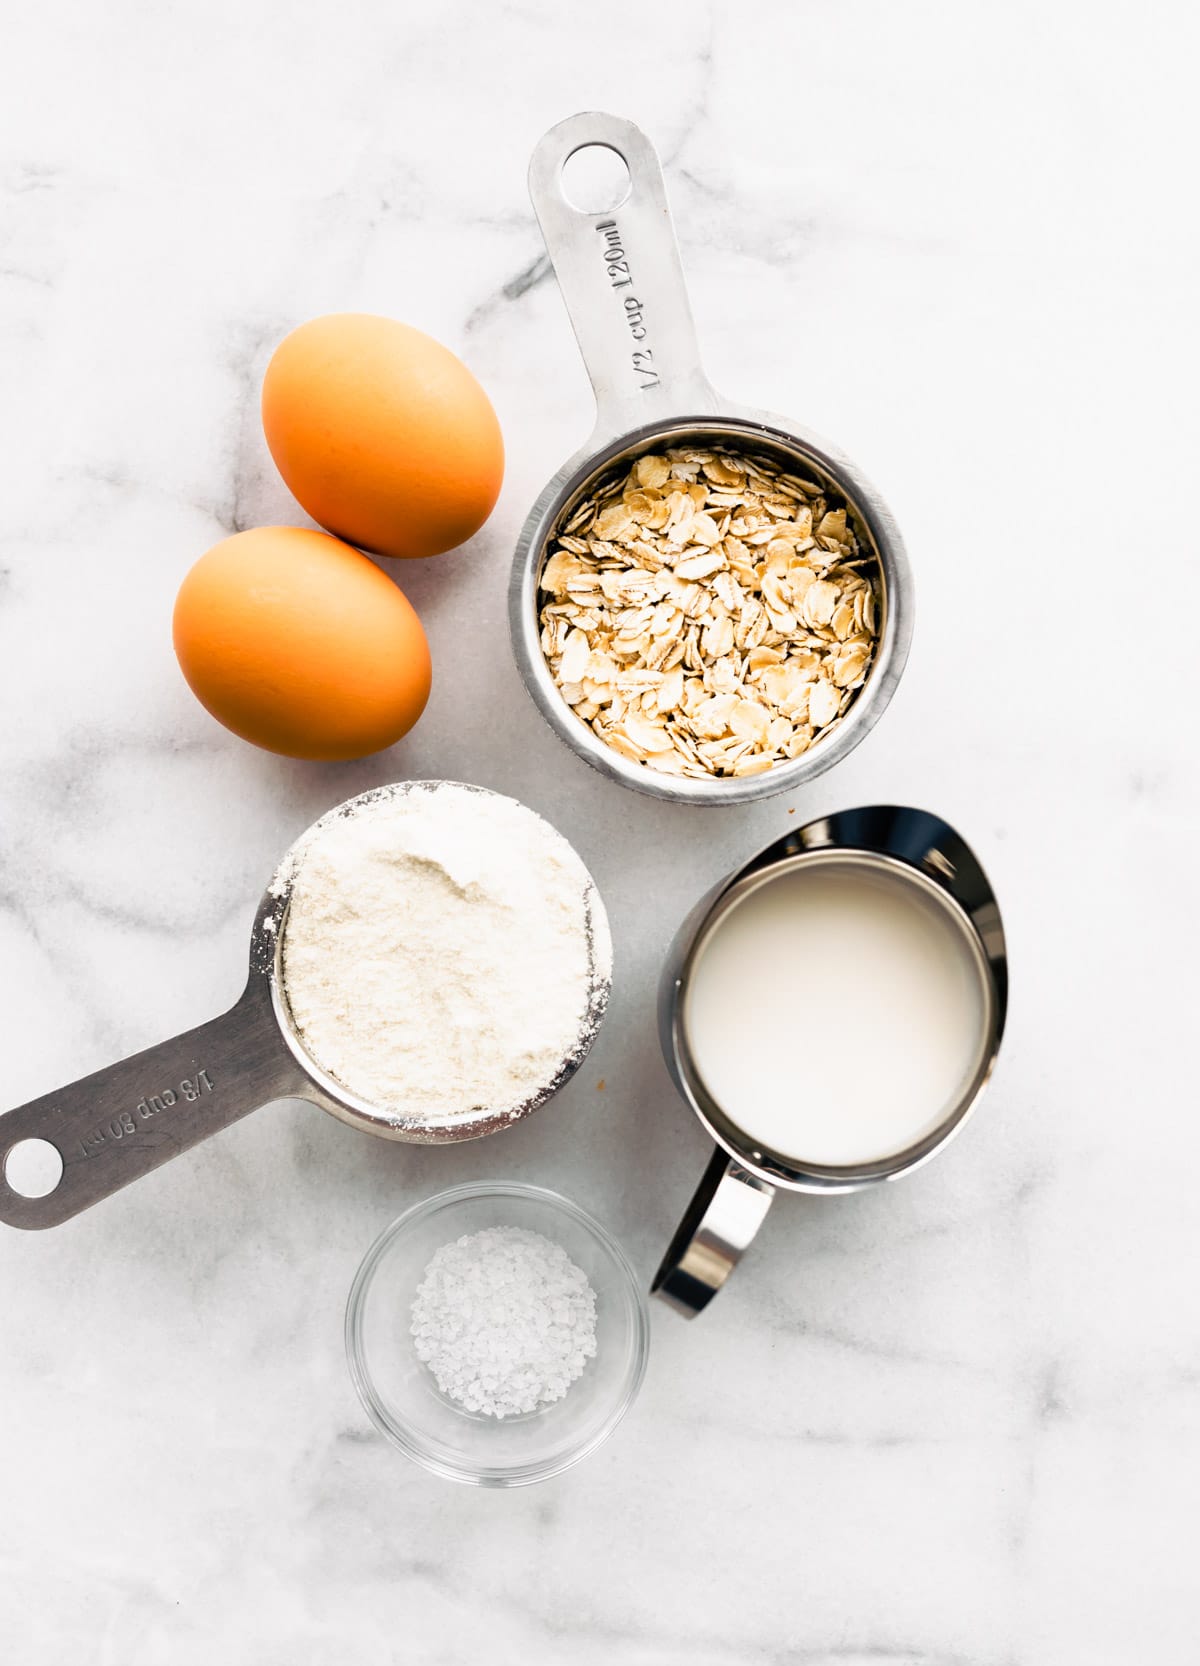 Ingredients for oatmeal crepes made with an egg arranged together.